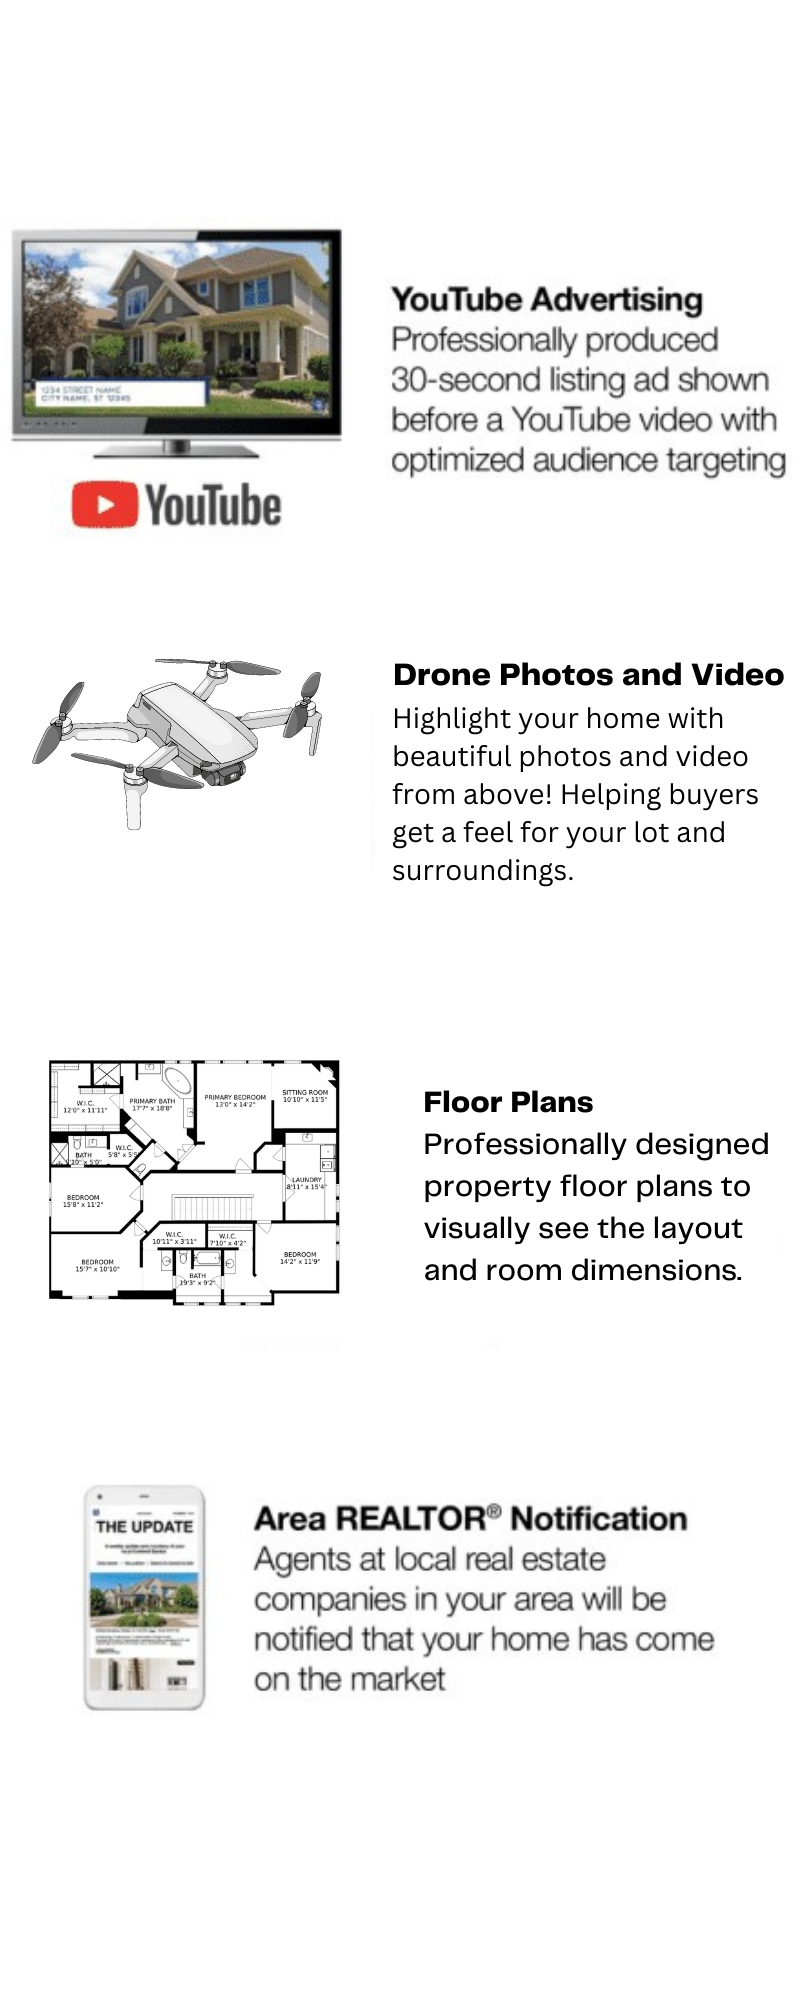 Highlight your home with beautiful photos and video from above! Helping buyers get a feel for your lot and surroundings.-2